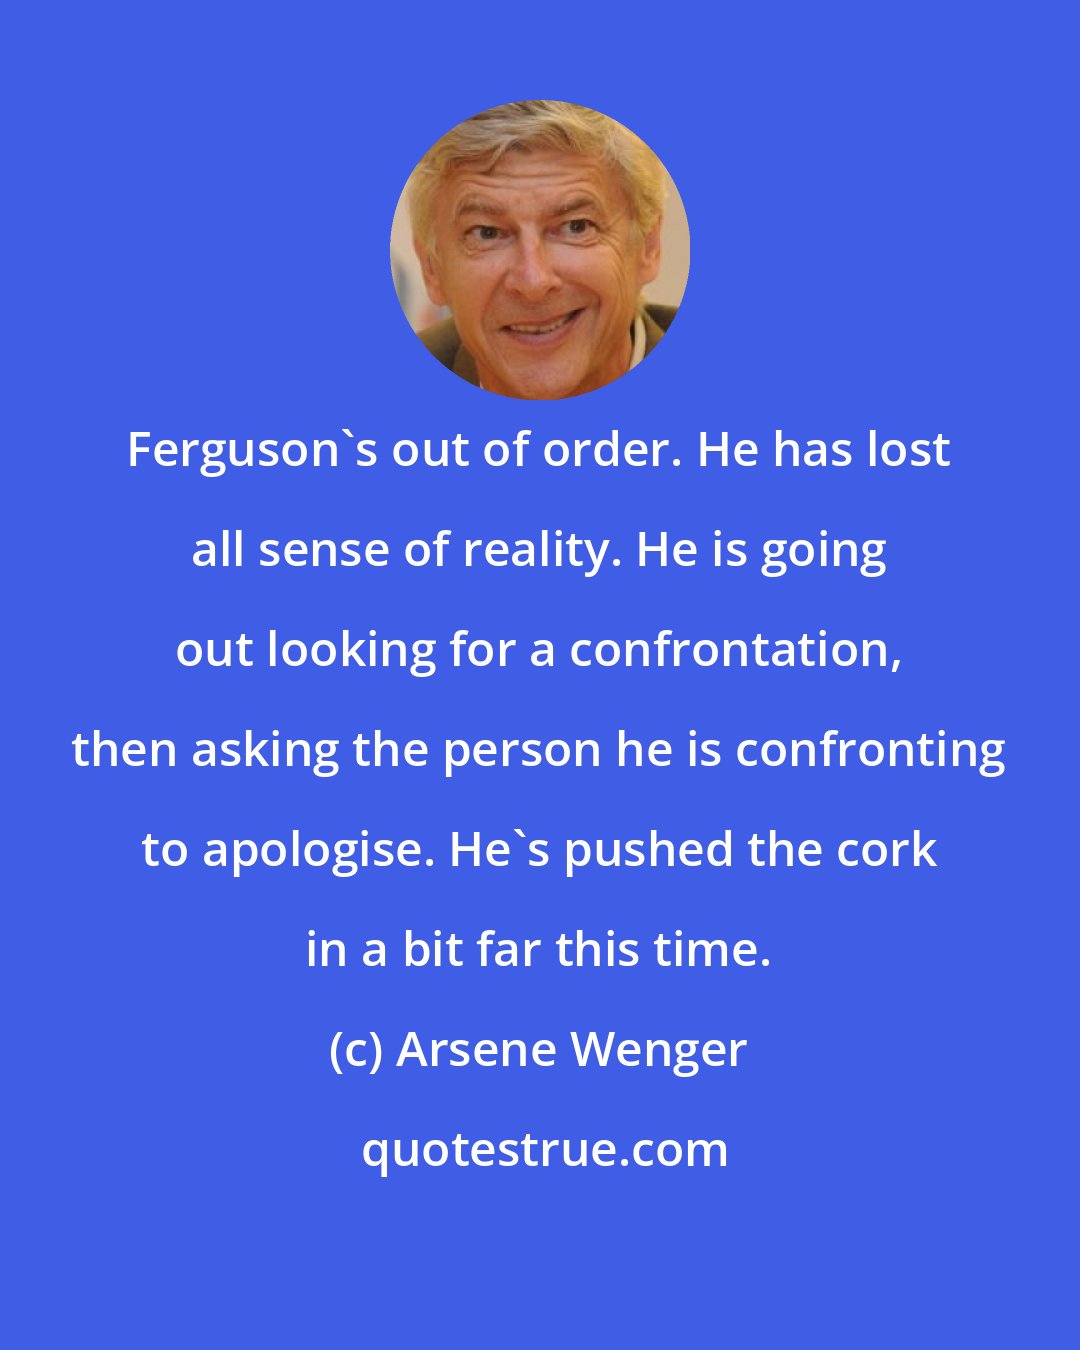 Arsene Wenger: Ferguson's out of order. He has lost all sense of reality. He is going out looking for a confrontation, then asking the person he is confronting to apologise. He's pushed the cork in a bit far this time.